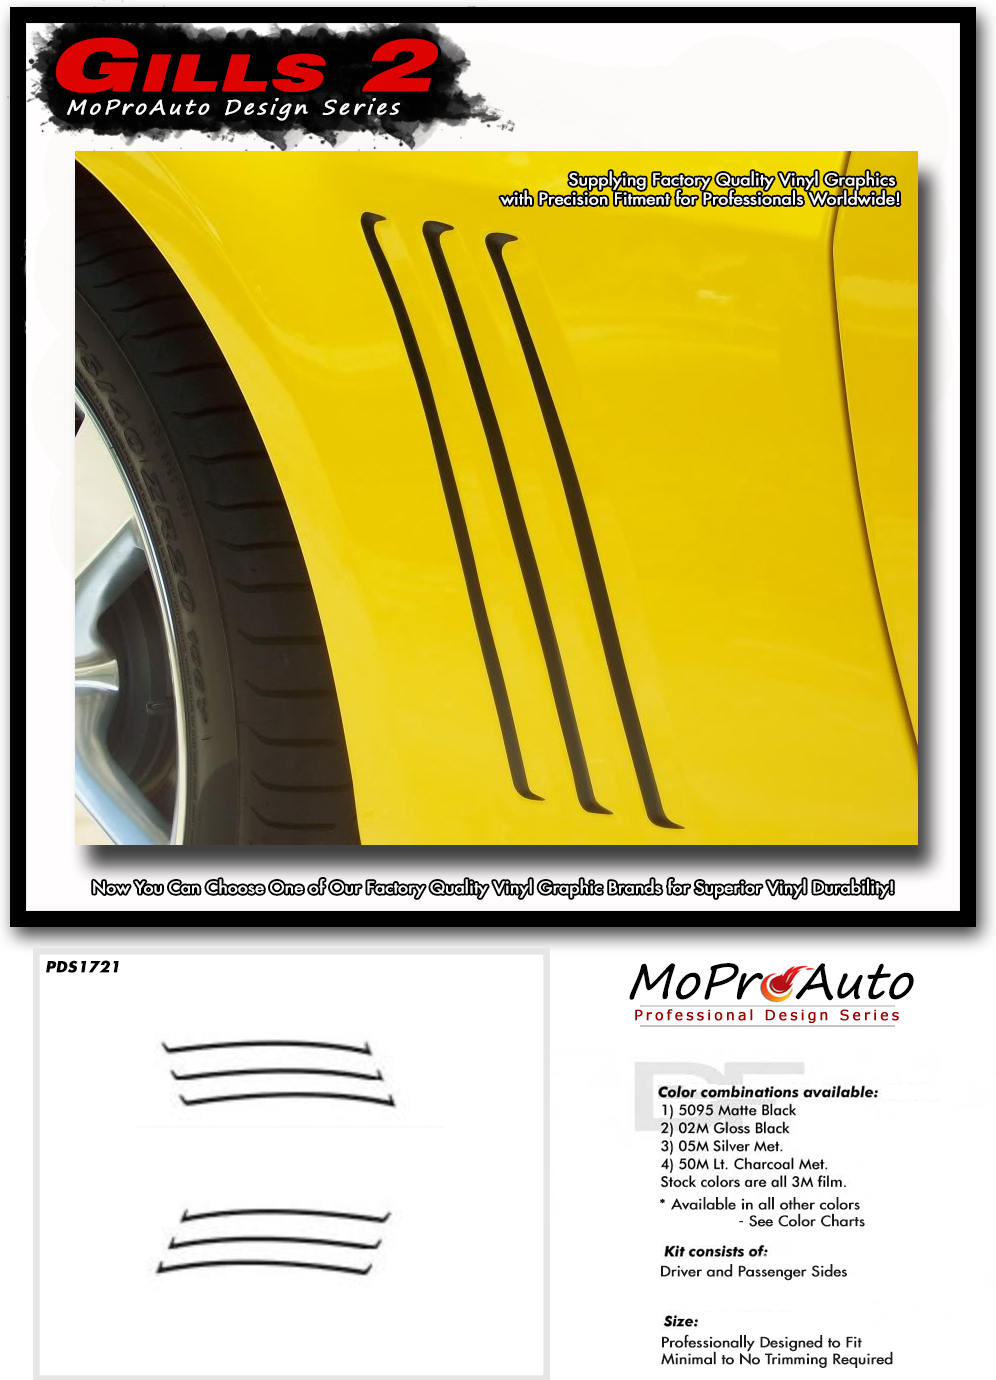 Chevy Camaro GILL STRIPES Vinyl Graphics, Stripes and Decals Set